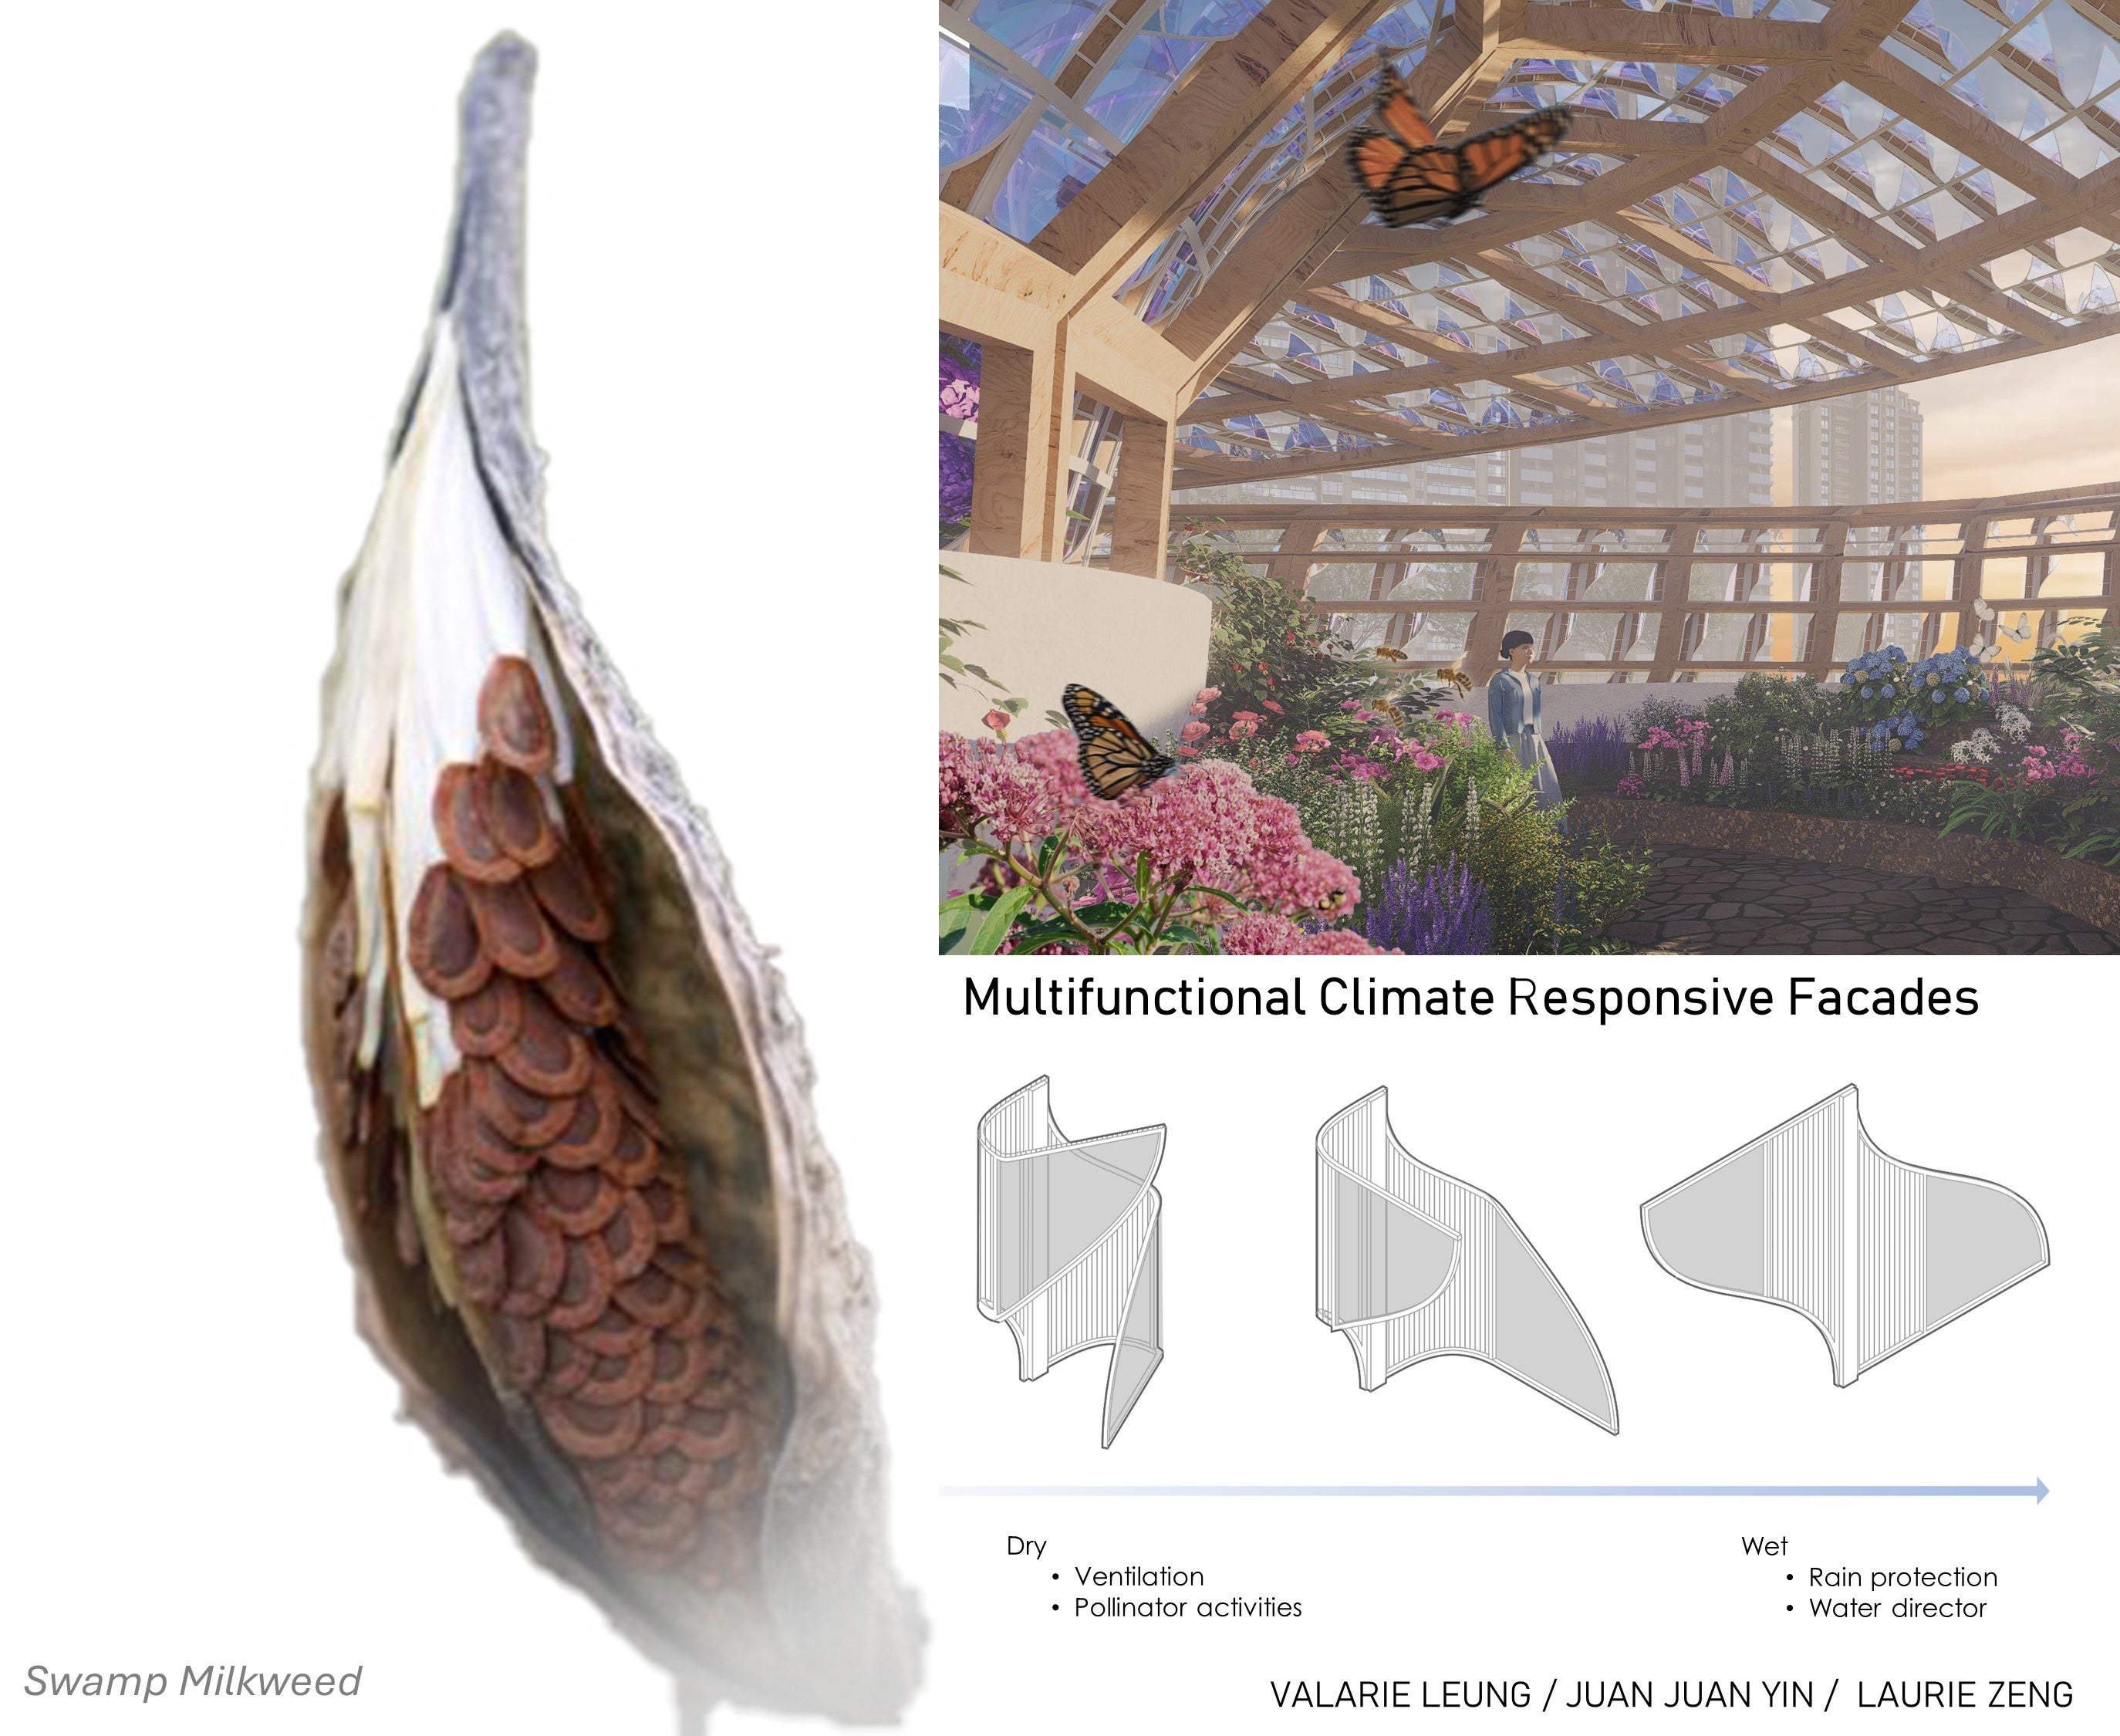 Architectural research project of a Climate responsive design based on swamp milkweed